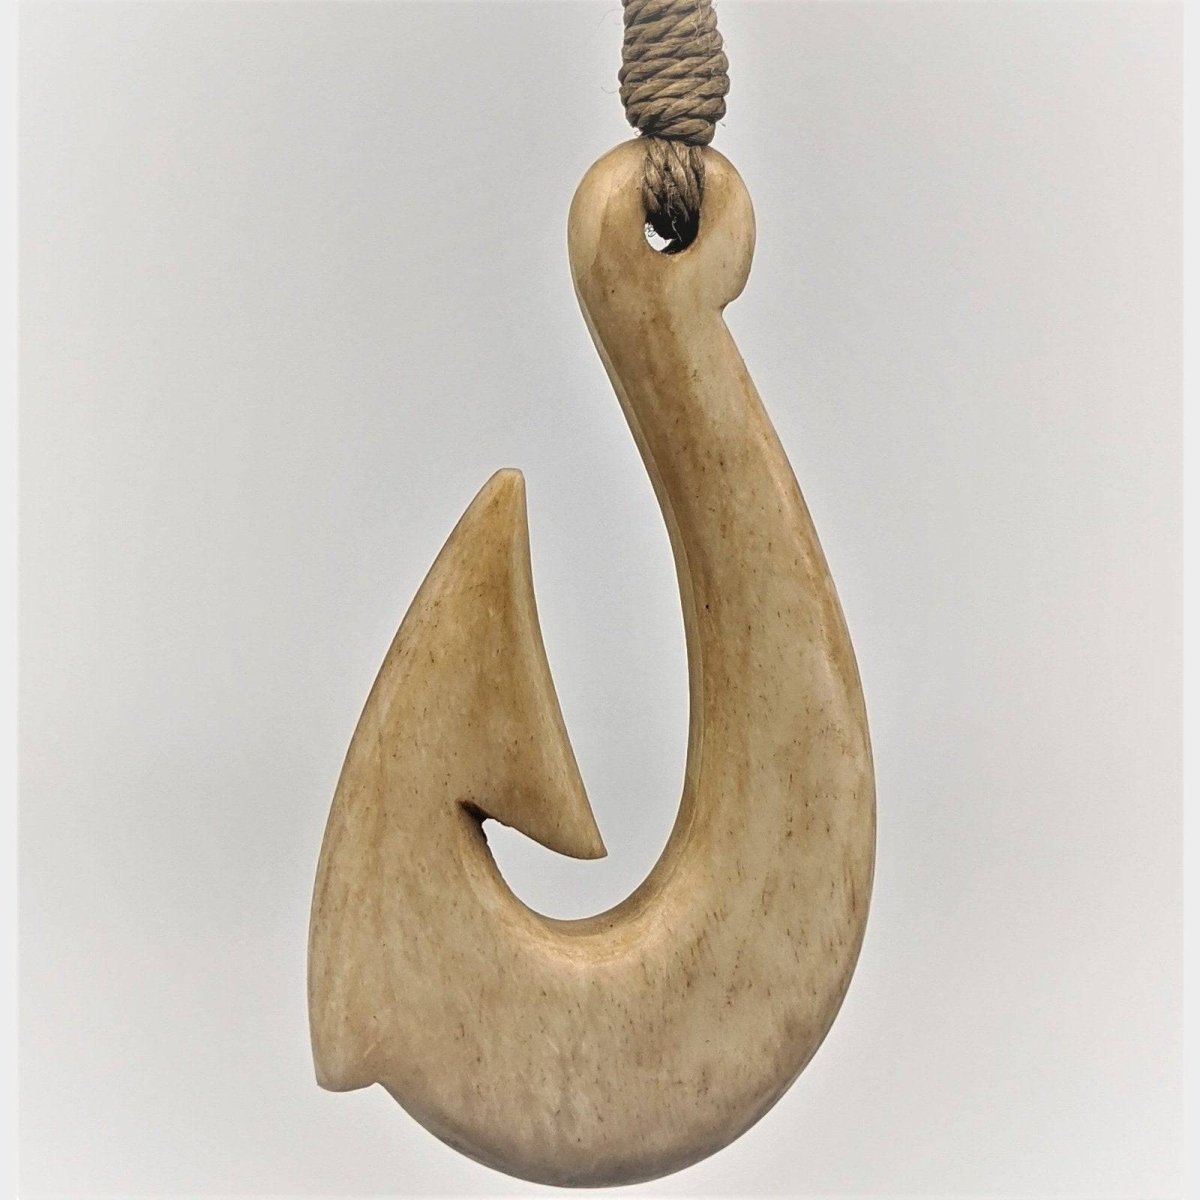 Hand Carved Solid Bone Stylized Pacific Islands Hawaiian Fish Hook Necklace - Earthbound Pacific